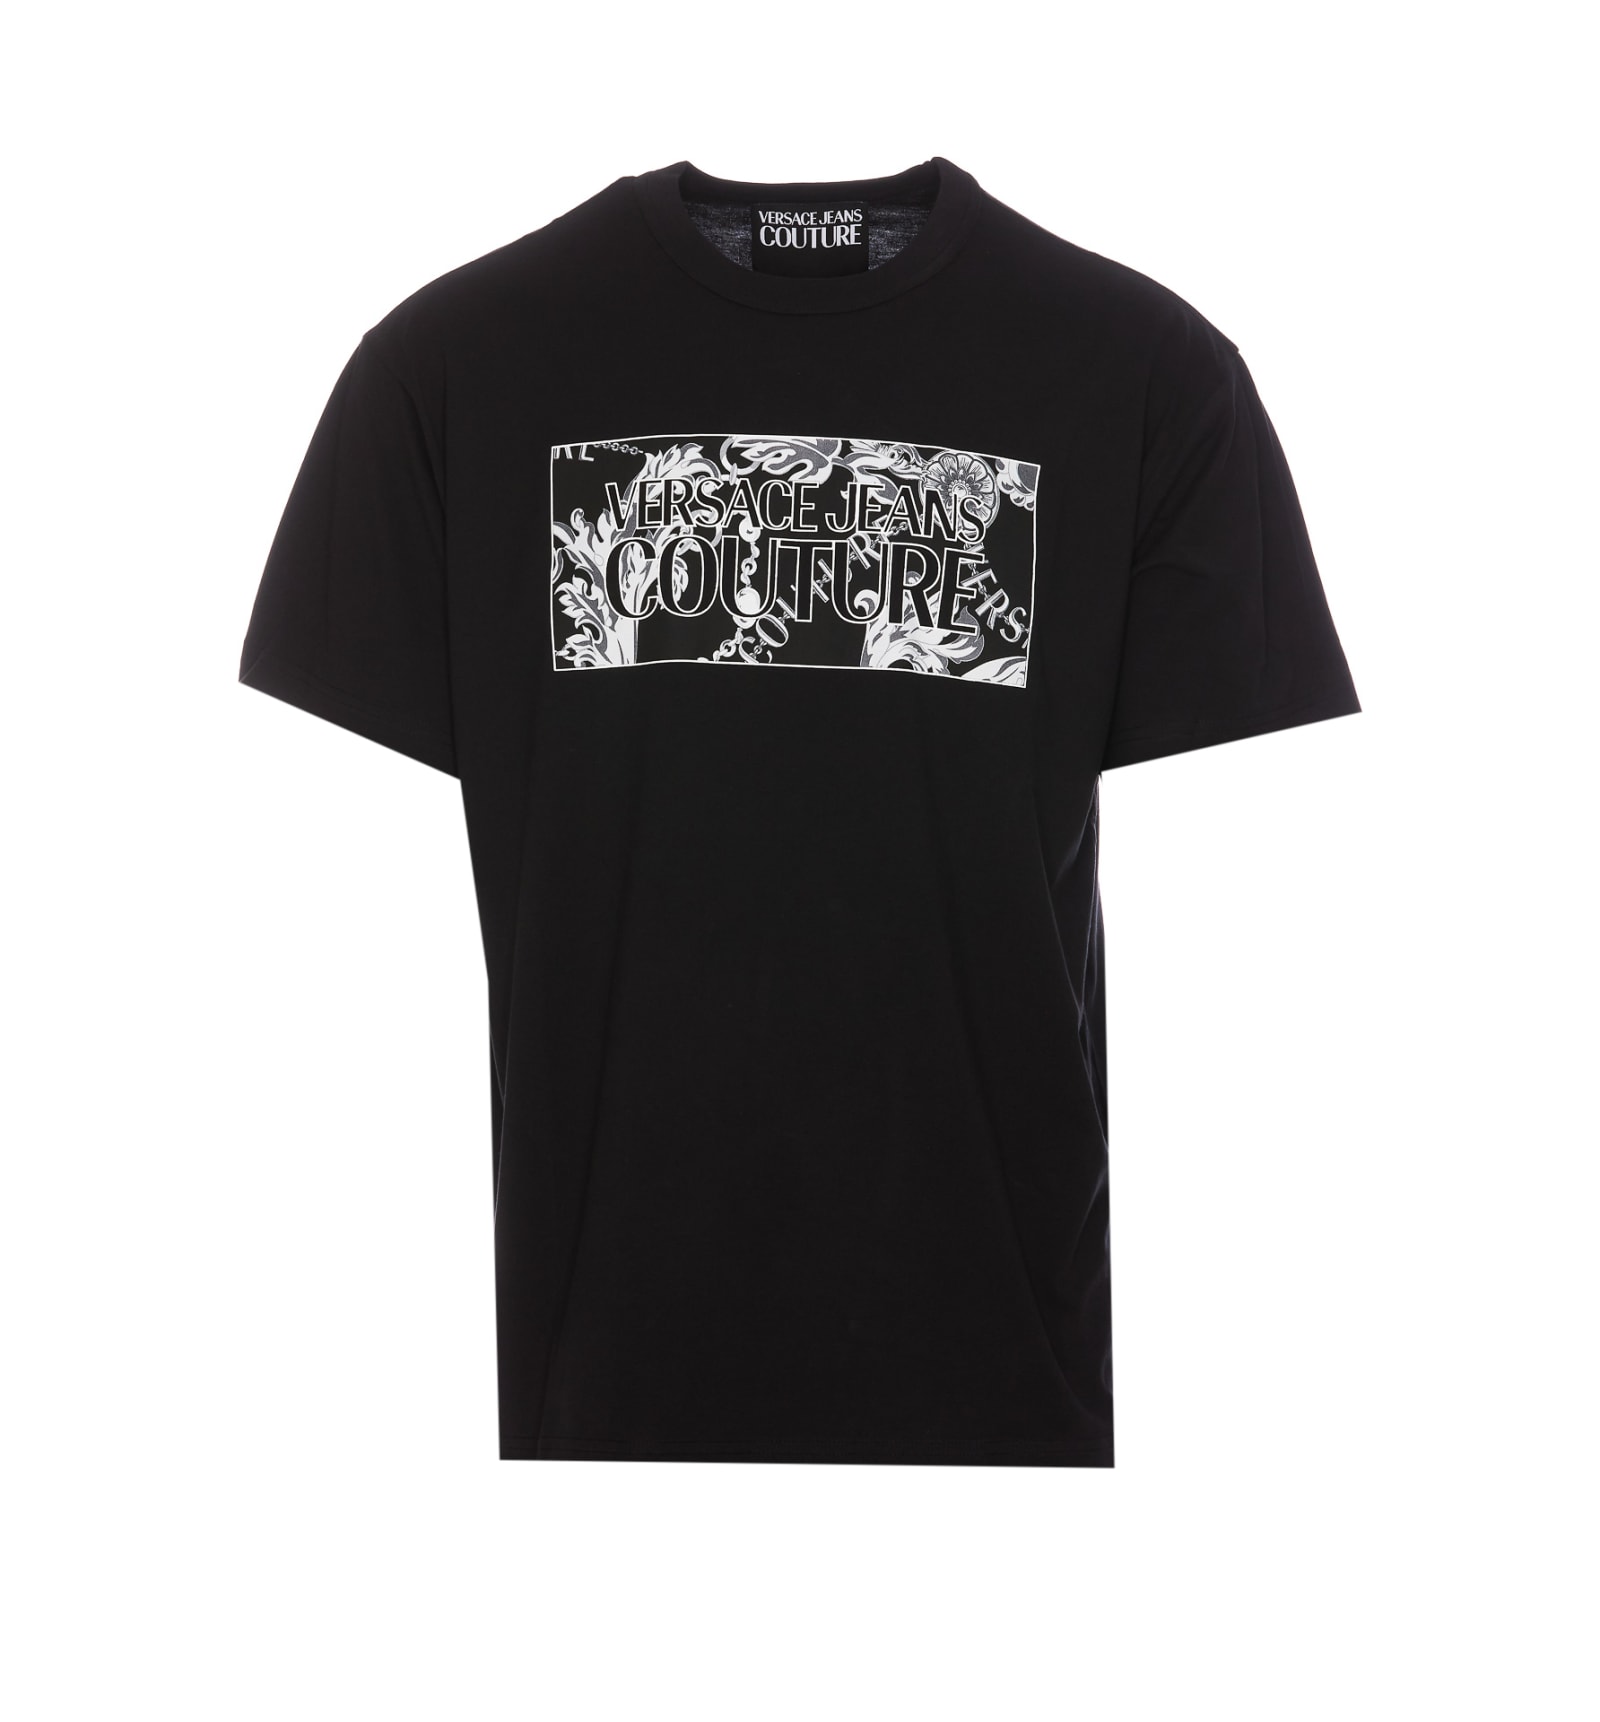 VERSACE JEANS COUTURE VERSACE CHAIN COUTURE T-SHIRT